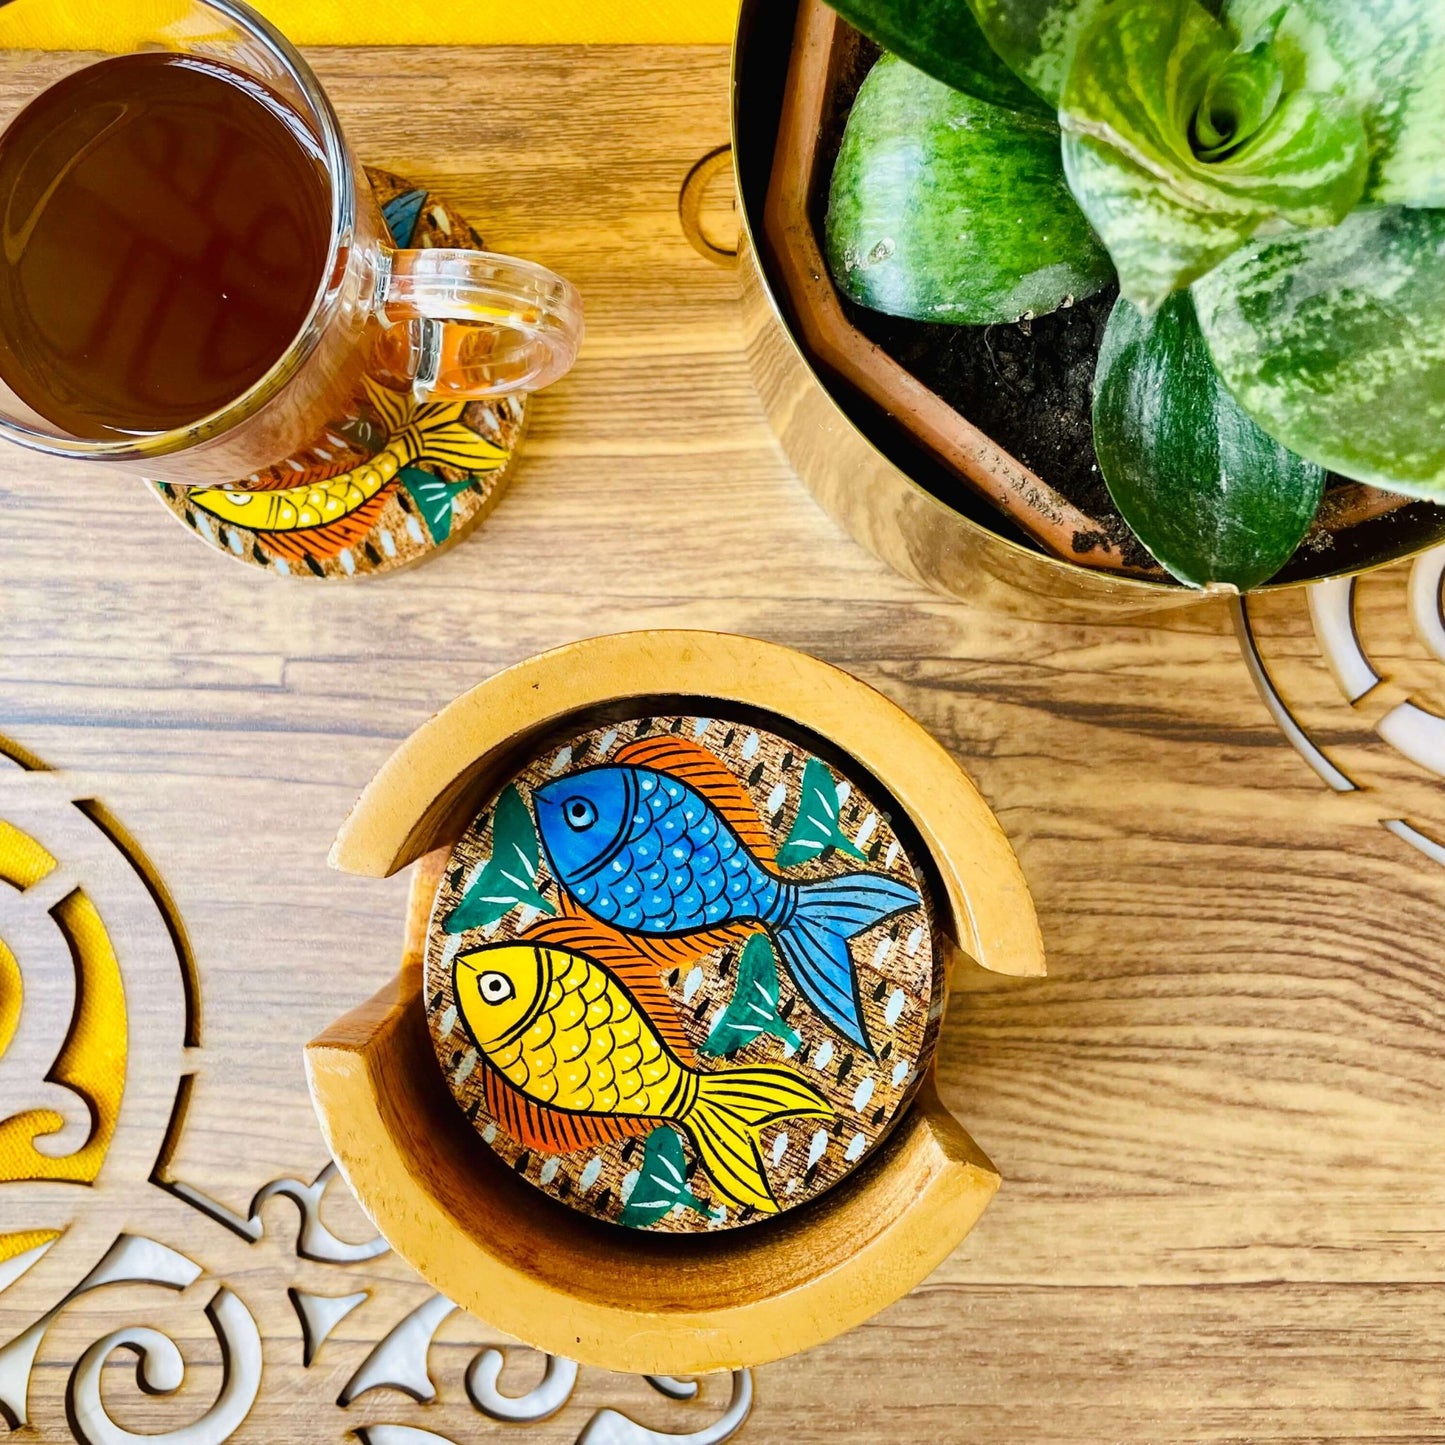 blue and yellow fish print round wood coasters placed in a round wooden coaster holder near a flower pot and tea cup placed on a round wooden coaster.